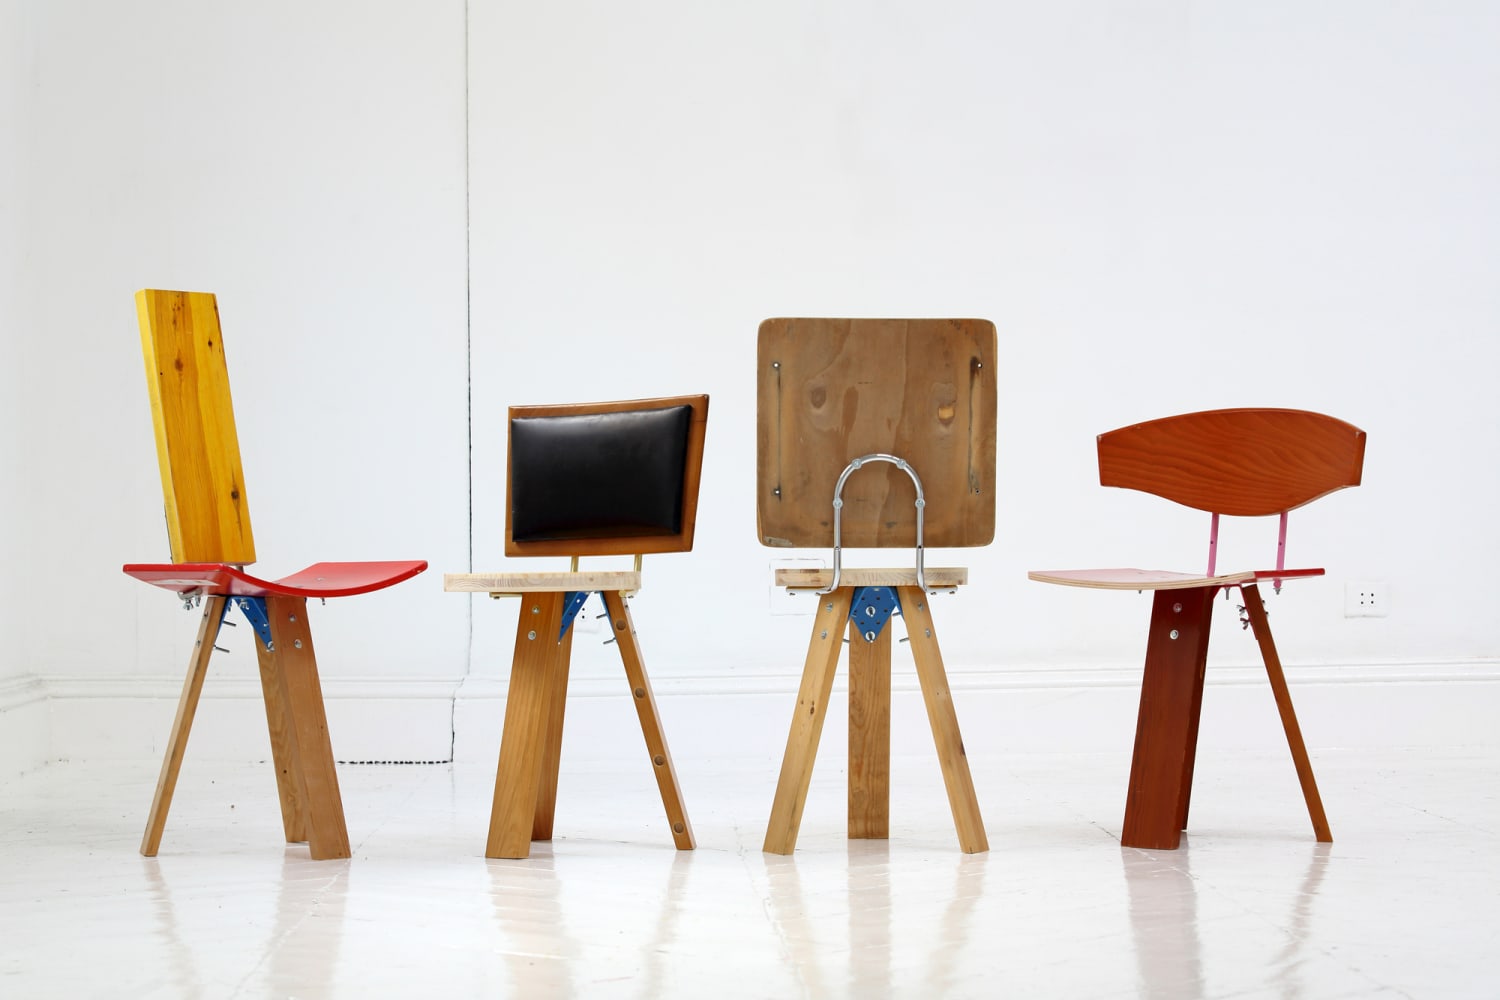 Upcycling Wood: Disused Materials Transformed Into Valuable And Useful Objects